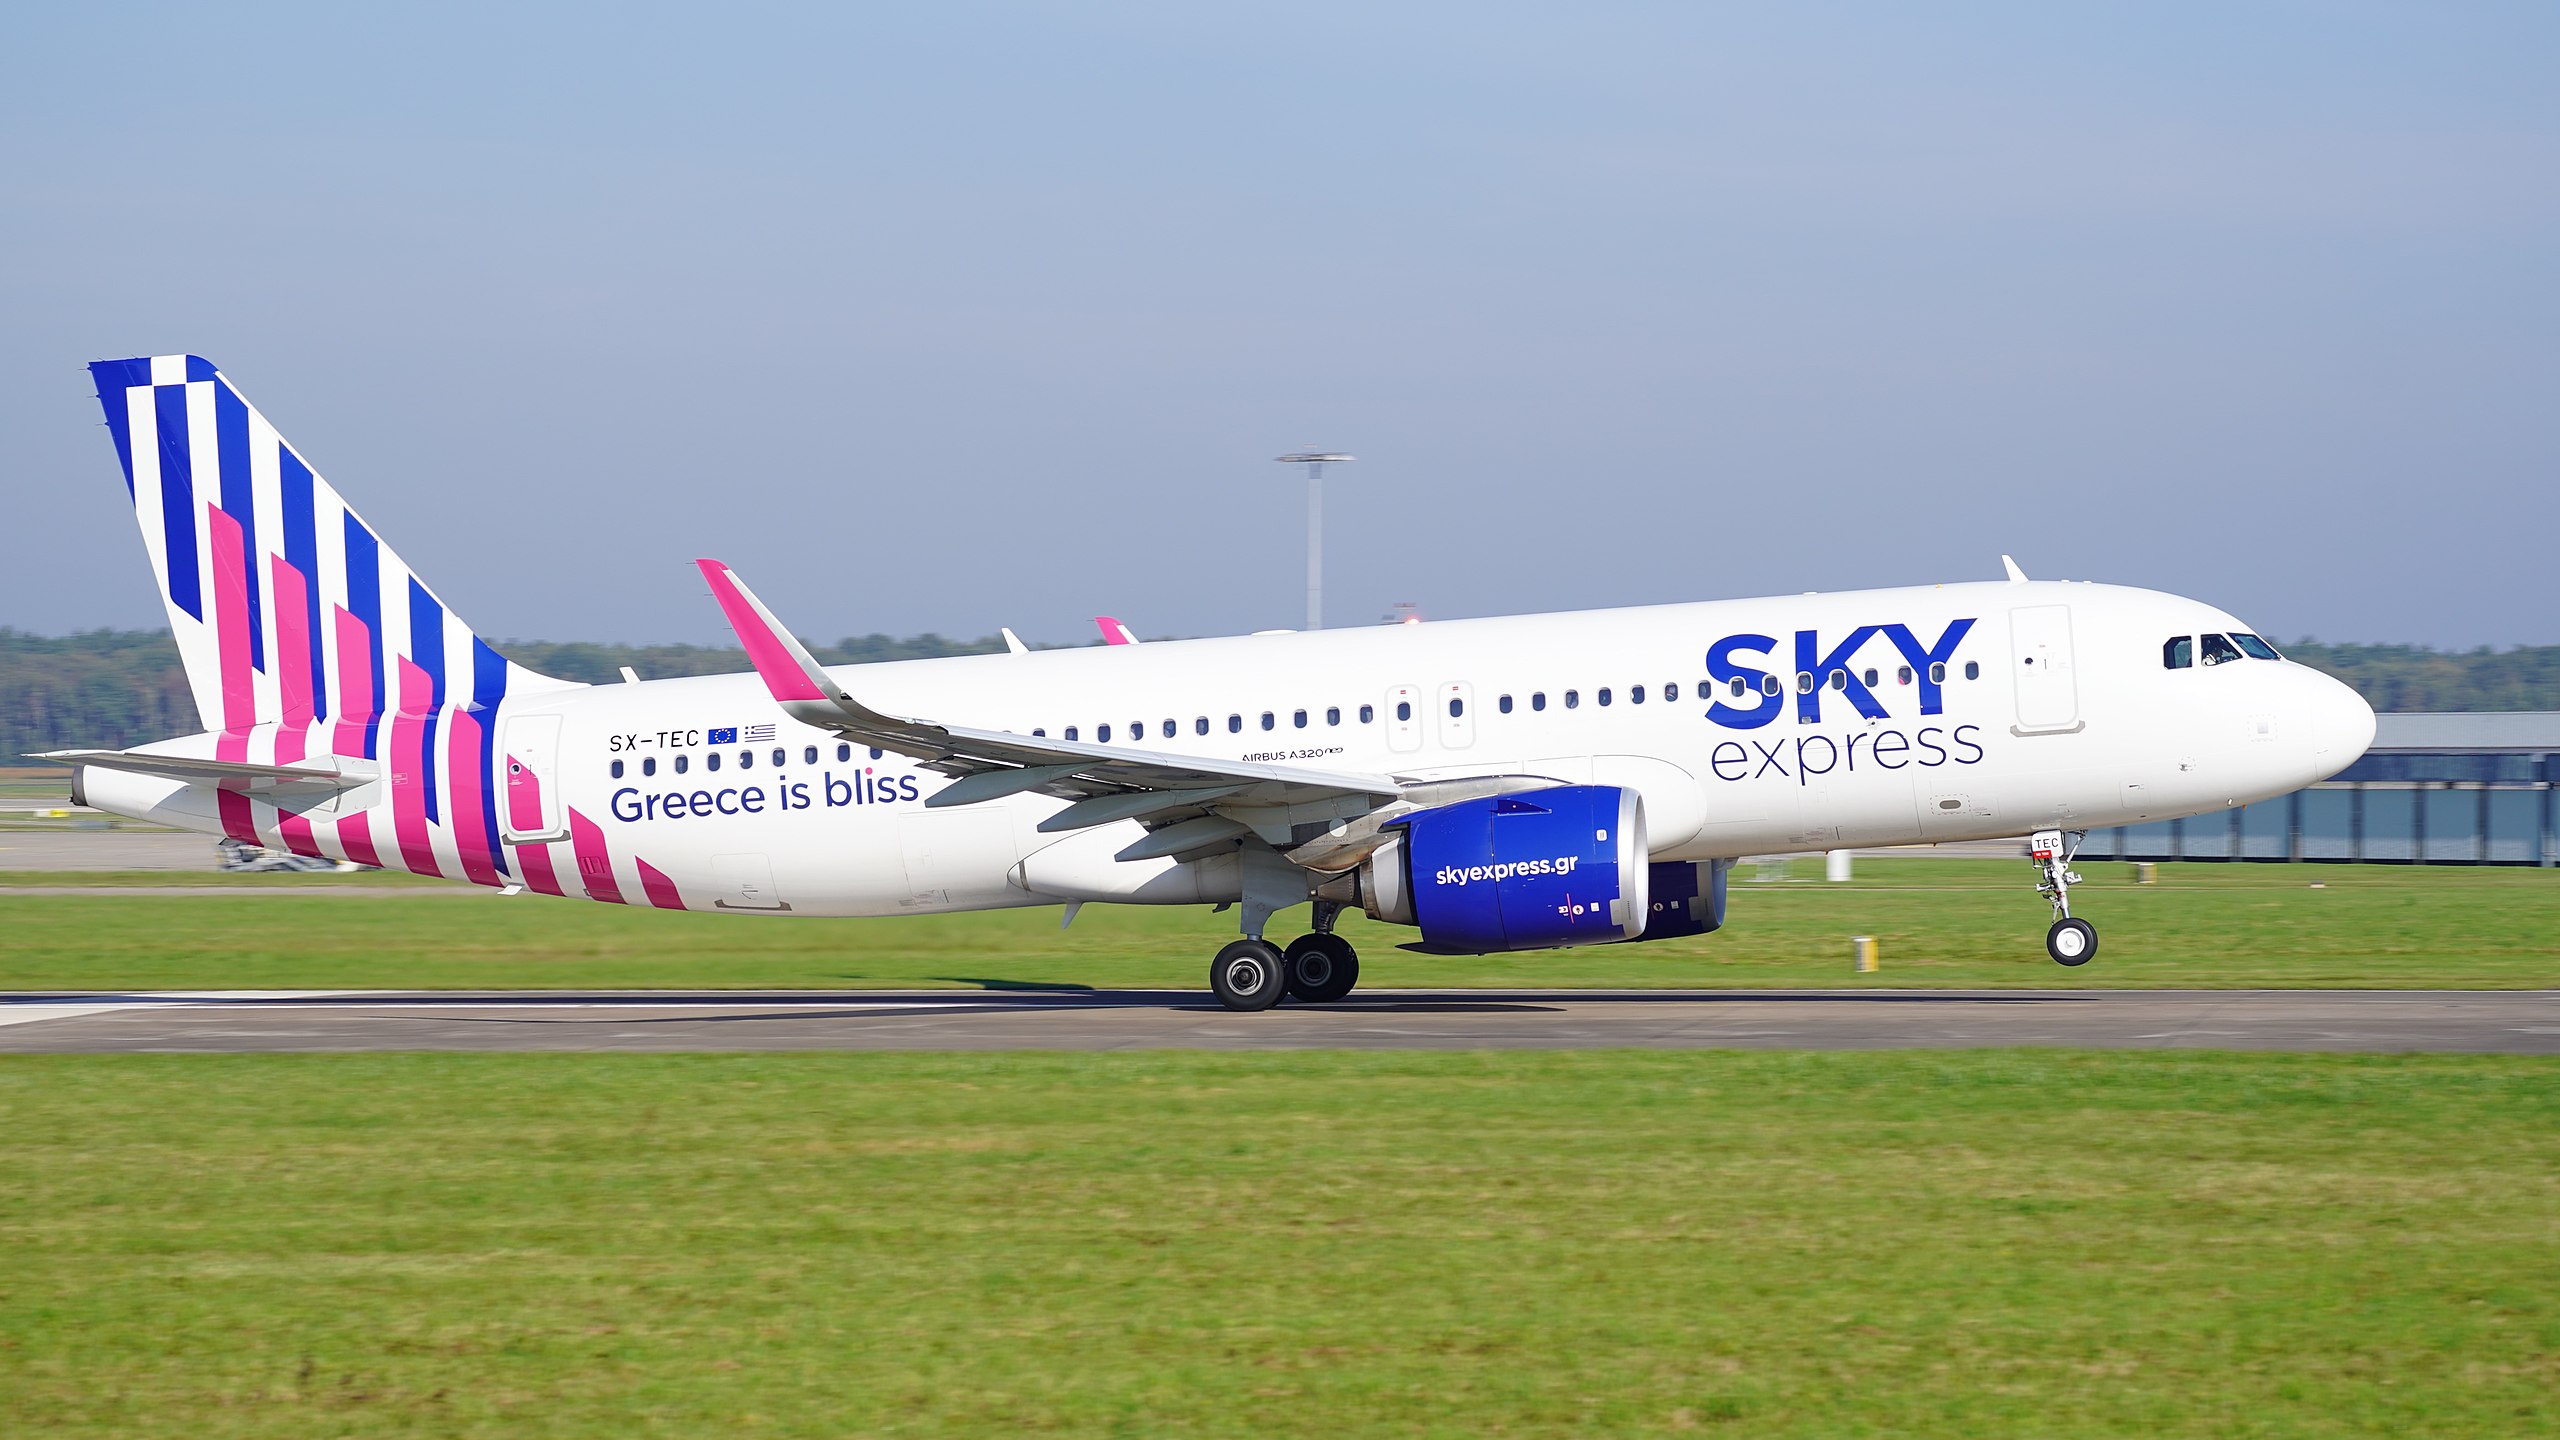 SKY express Launches Direct Athens-Sofia Flights - AviationSource News